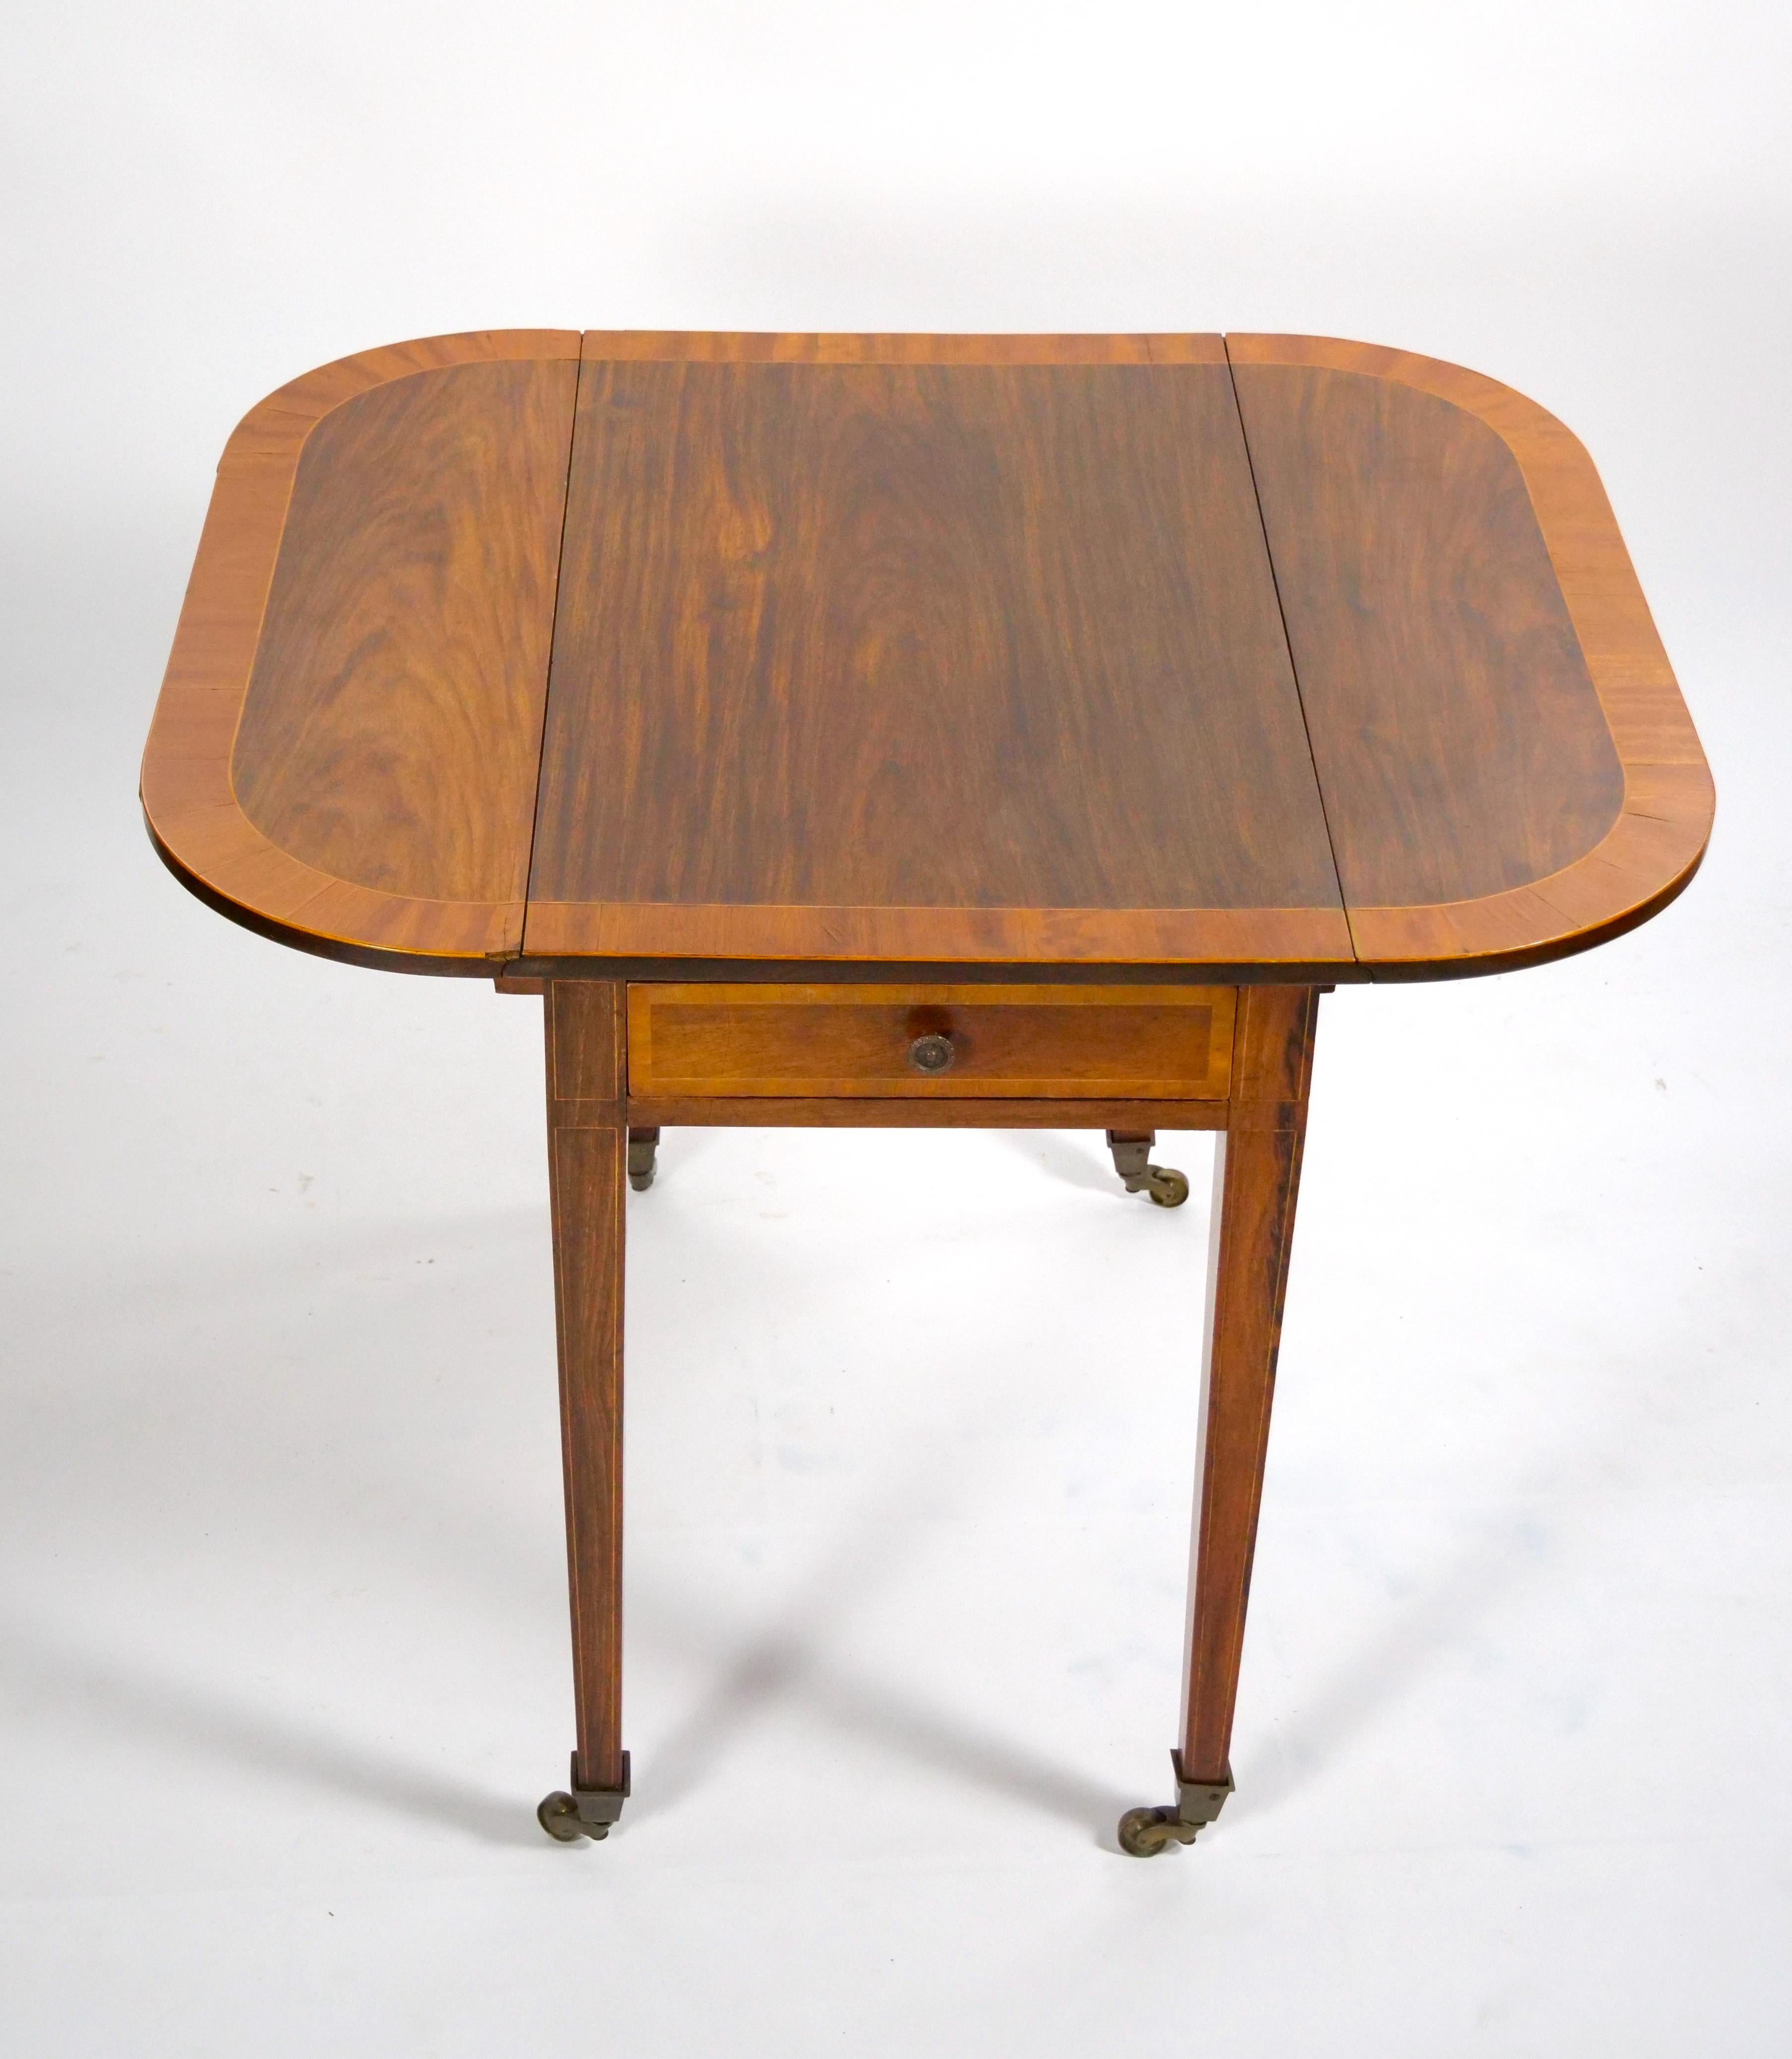 19th Century English Burl Mahogany Two Folding Leaves Extension Table For Sale